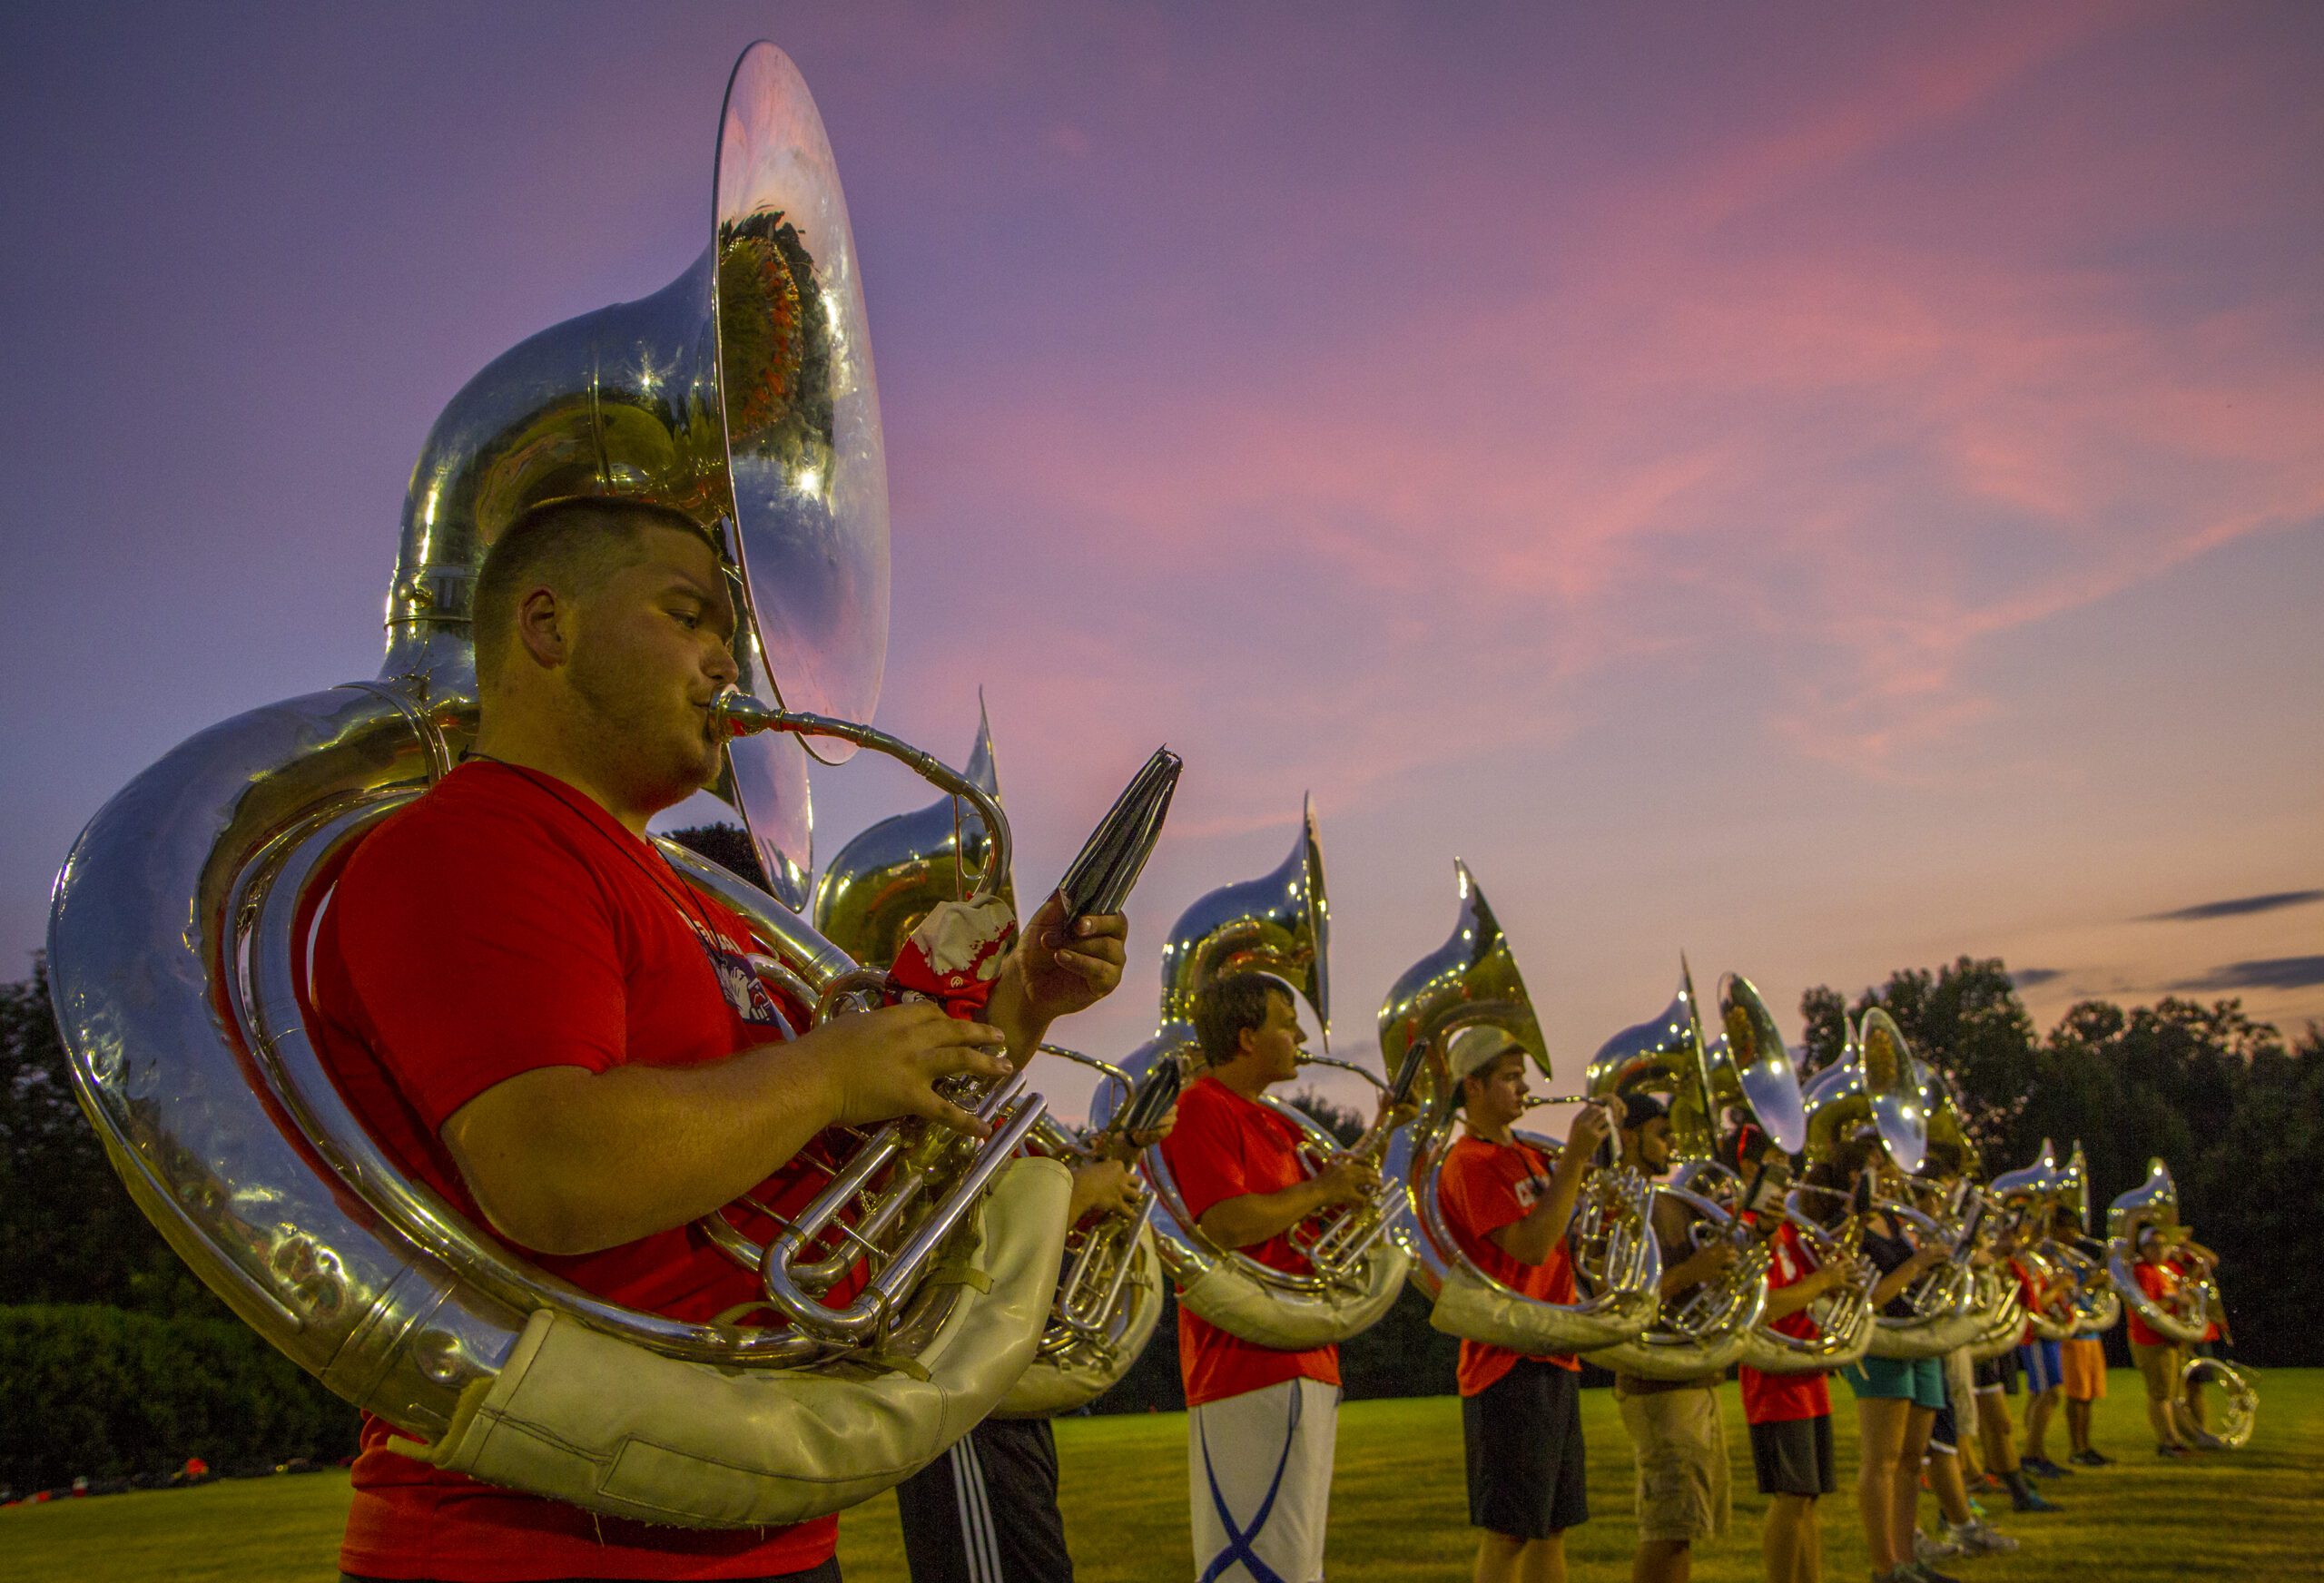 A row of sousaphone players rehearse under a bright orange sunset